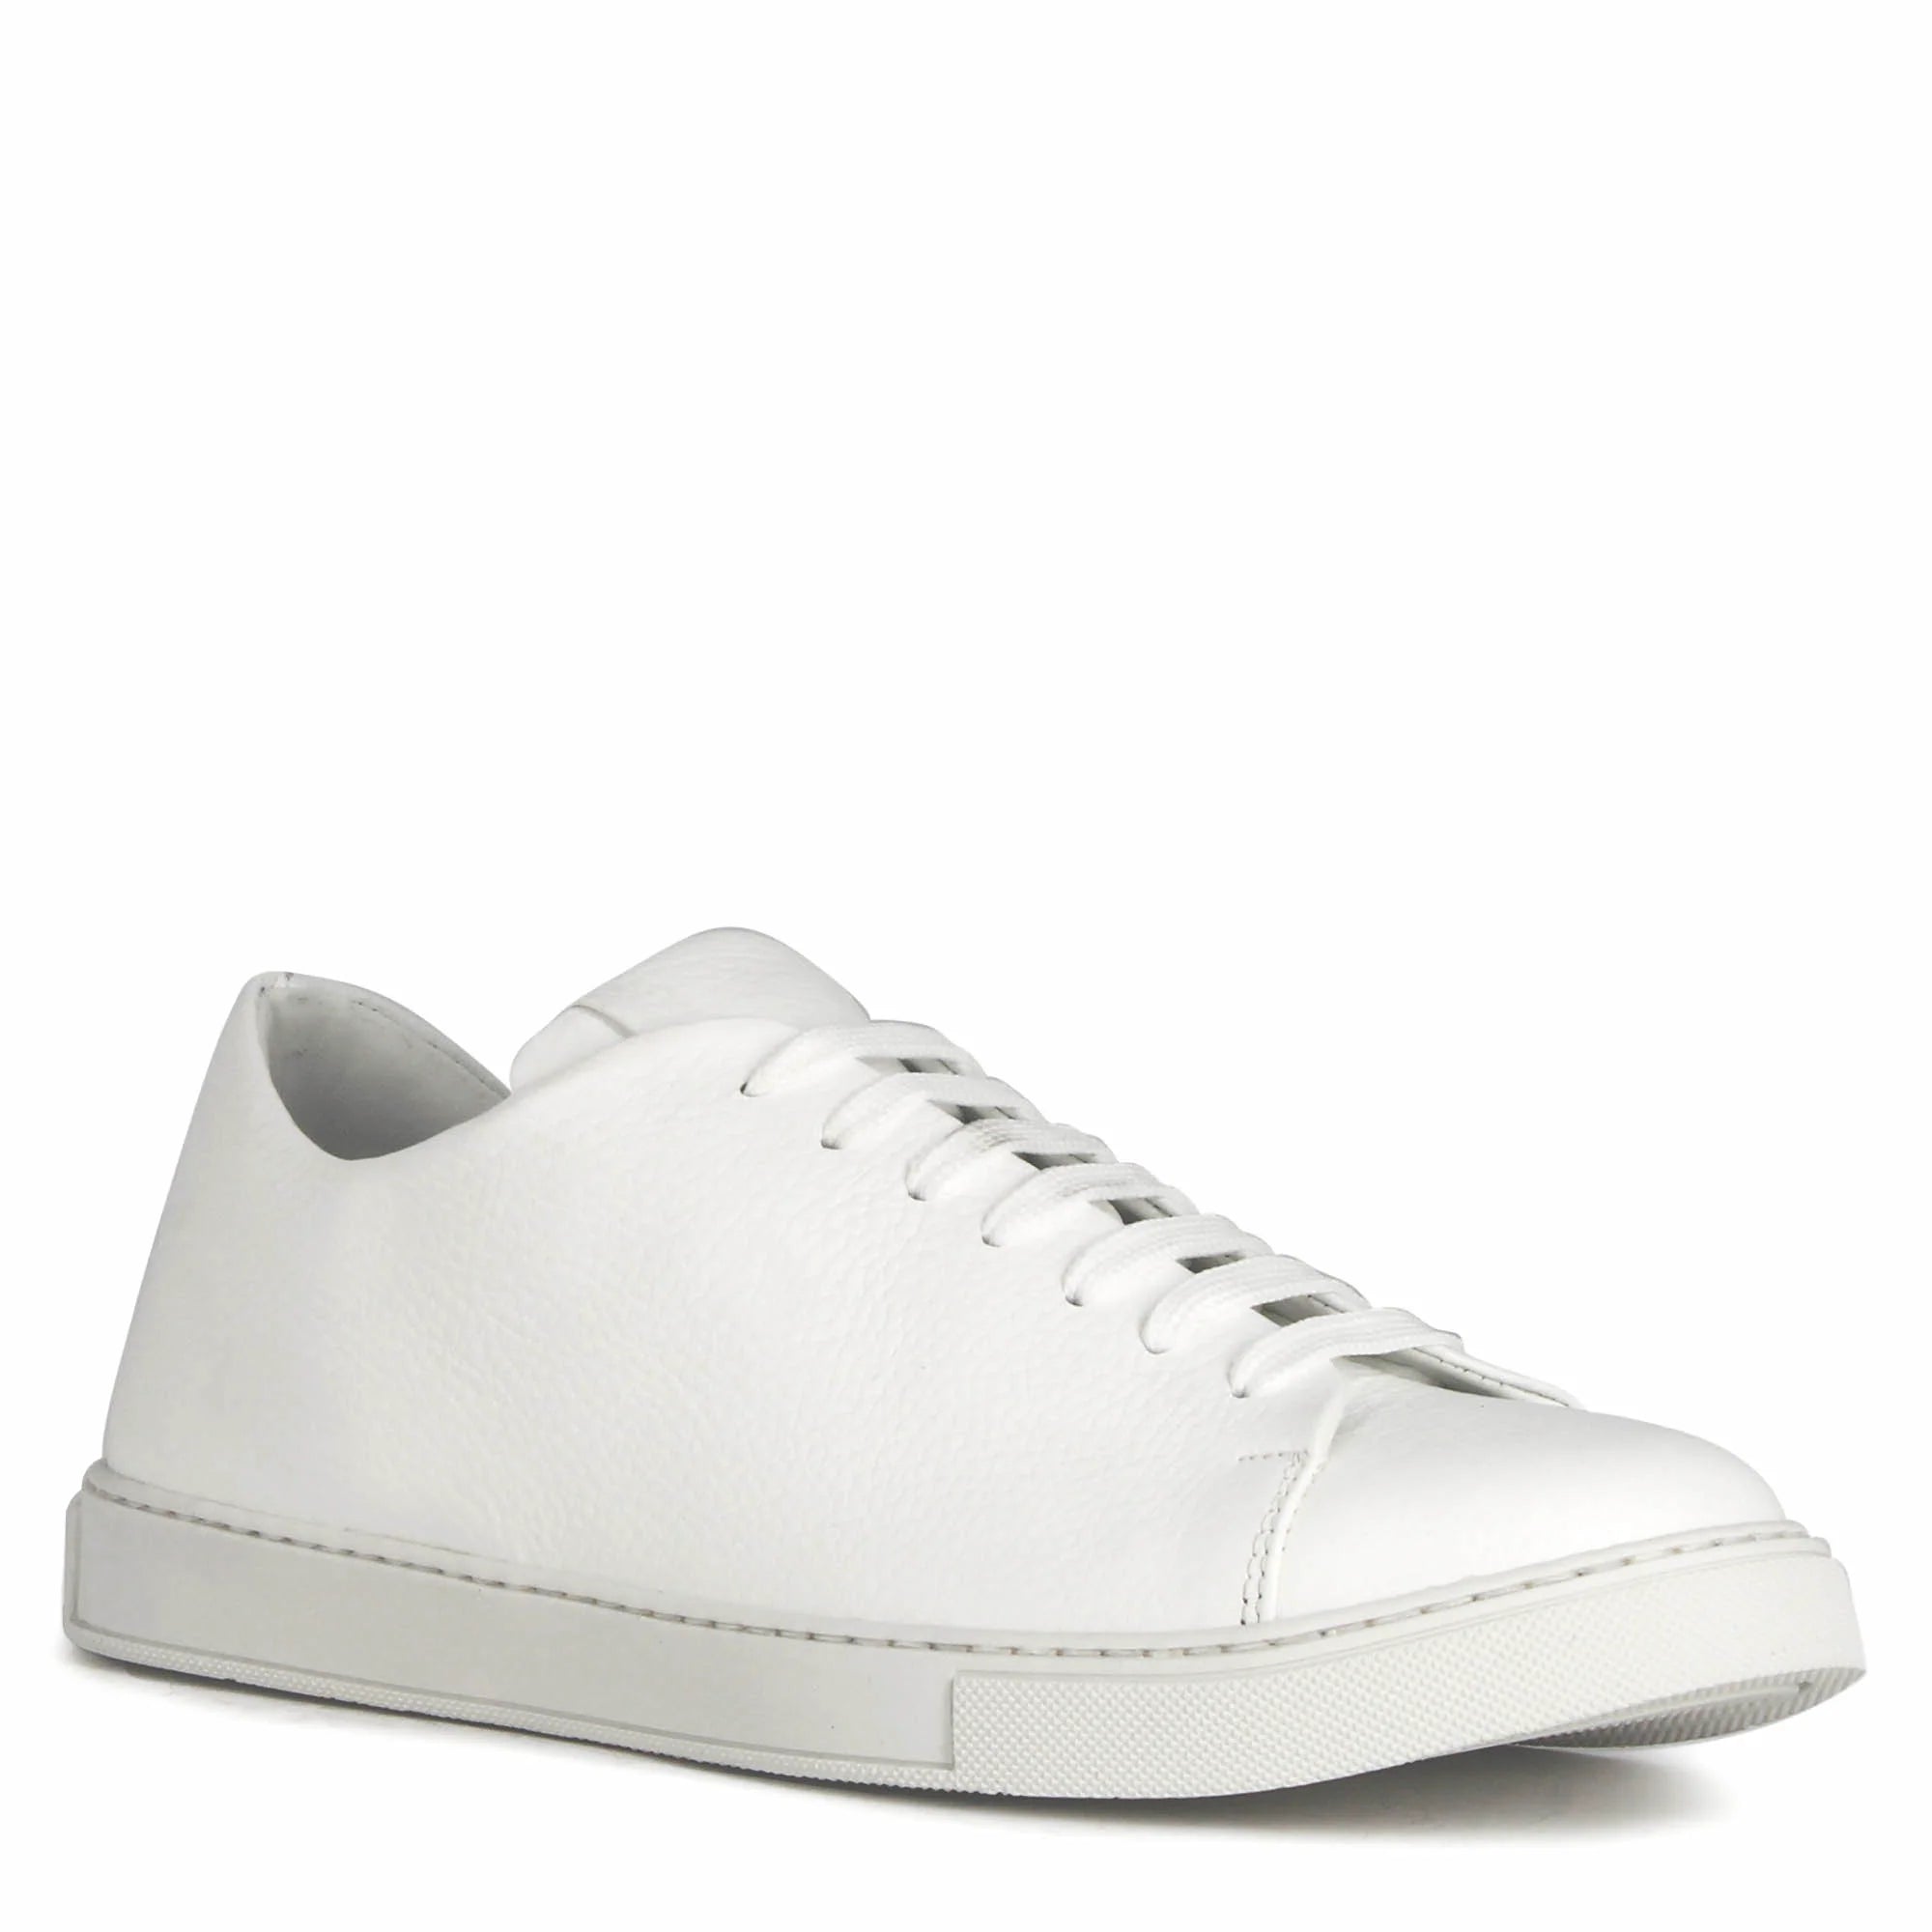 Classic White Leather Sneakers